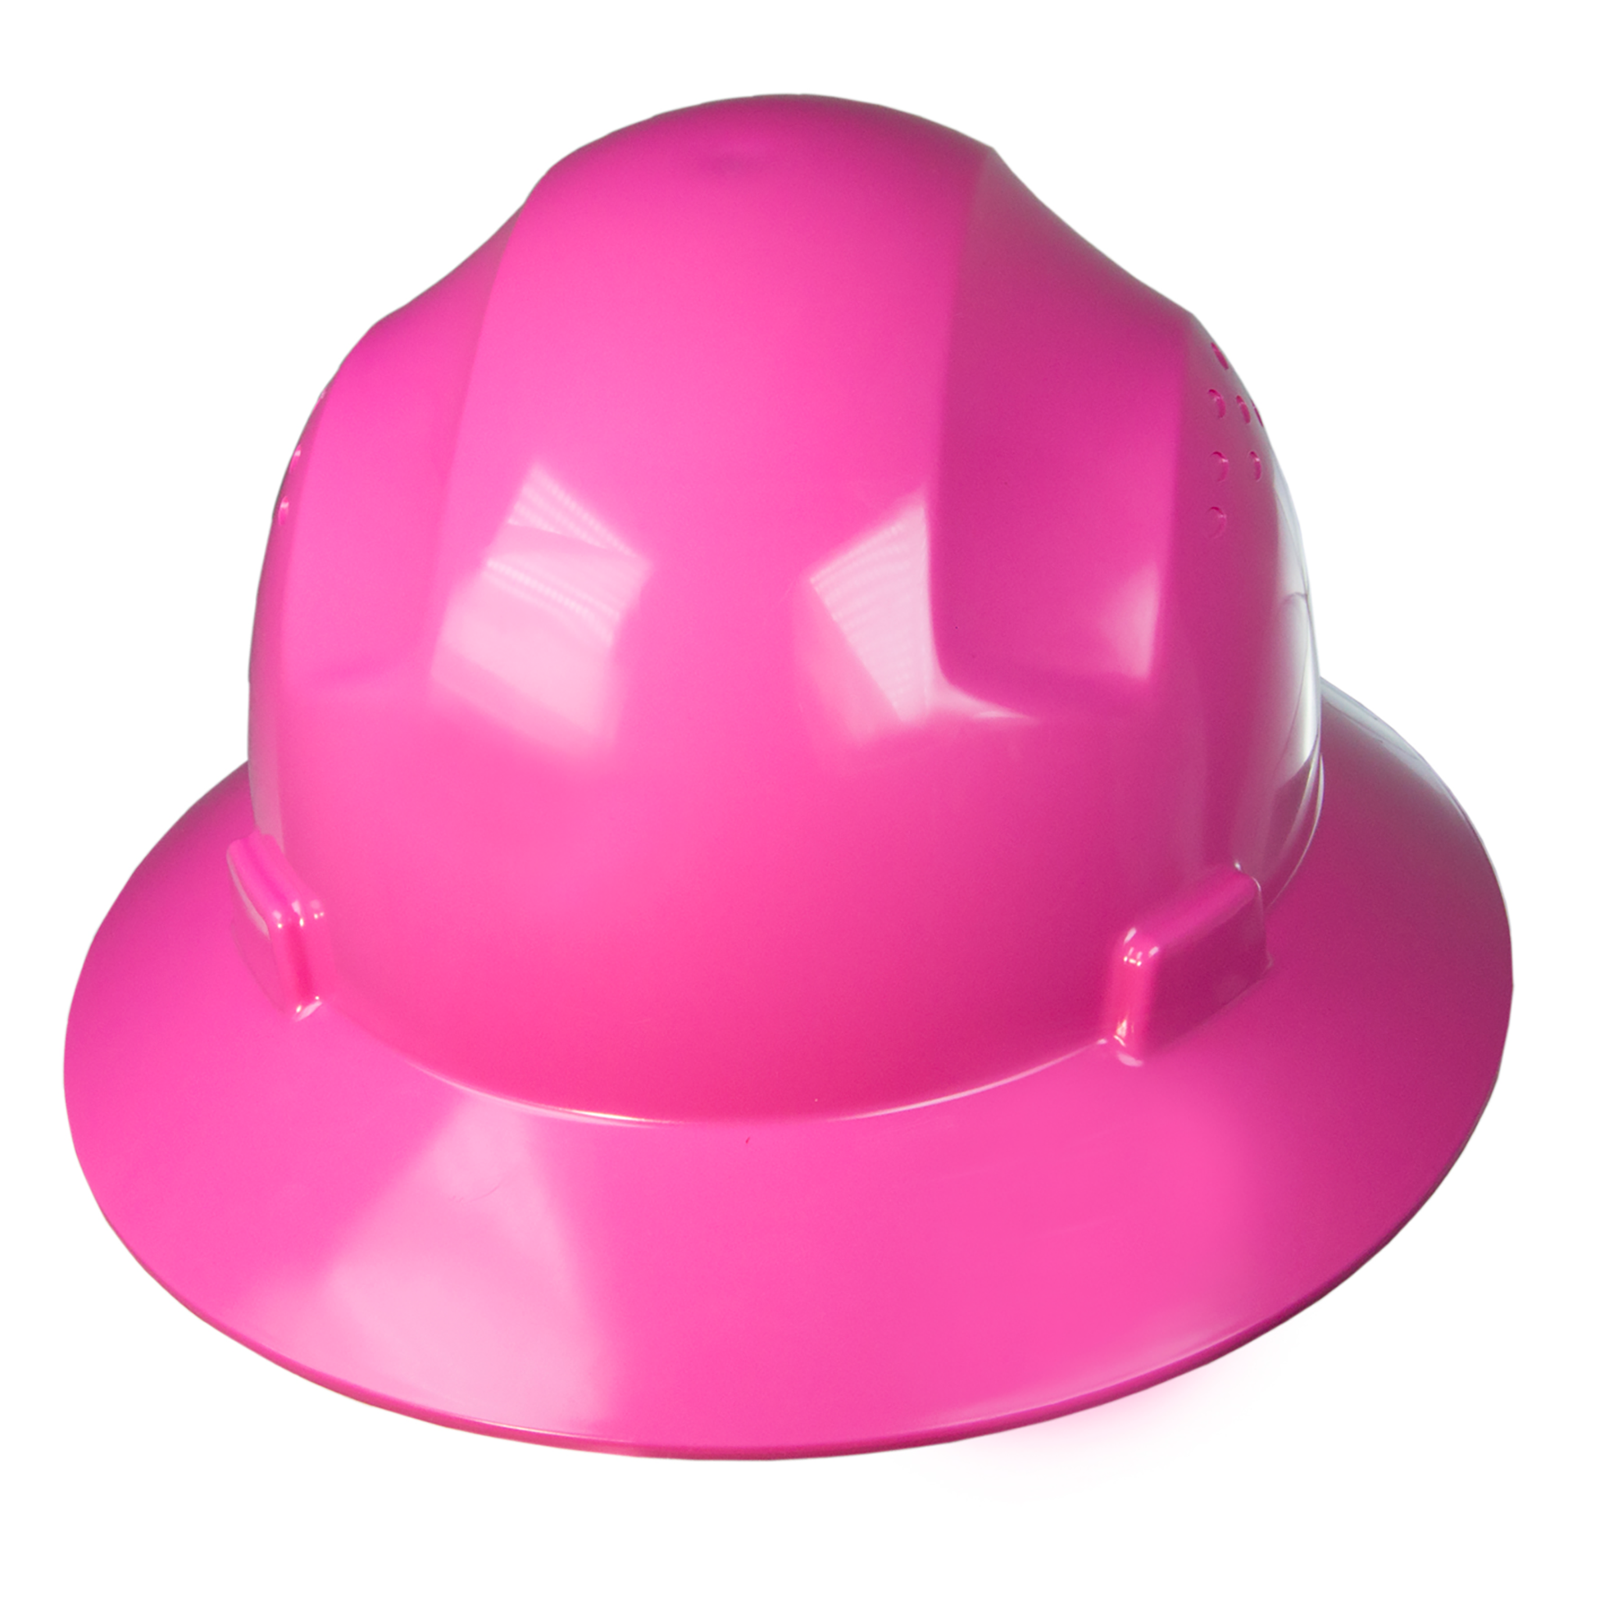 Full Brim Safety Hard Hat with 4 Point Suspension - PinkFit Collection